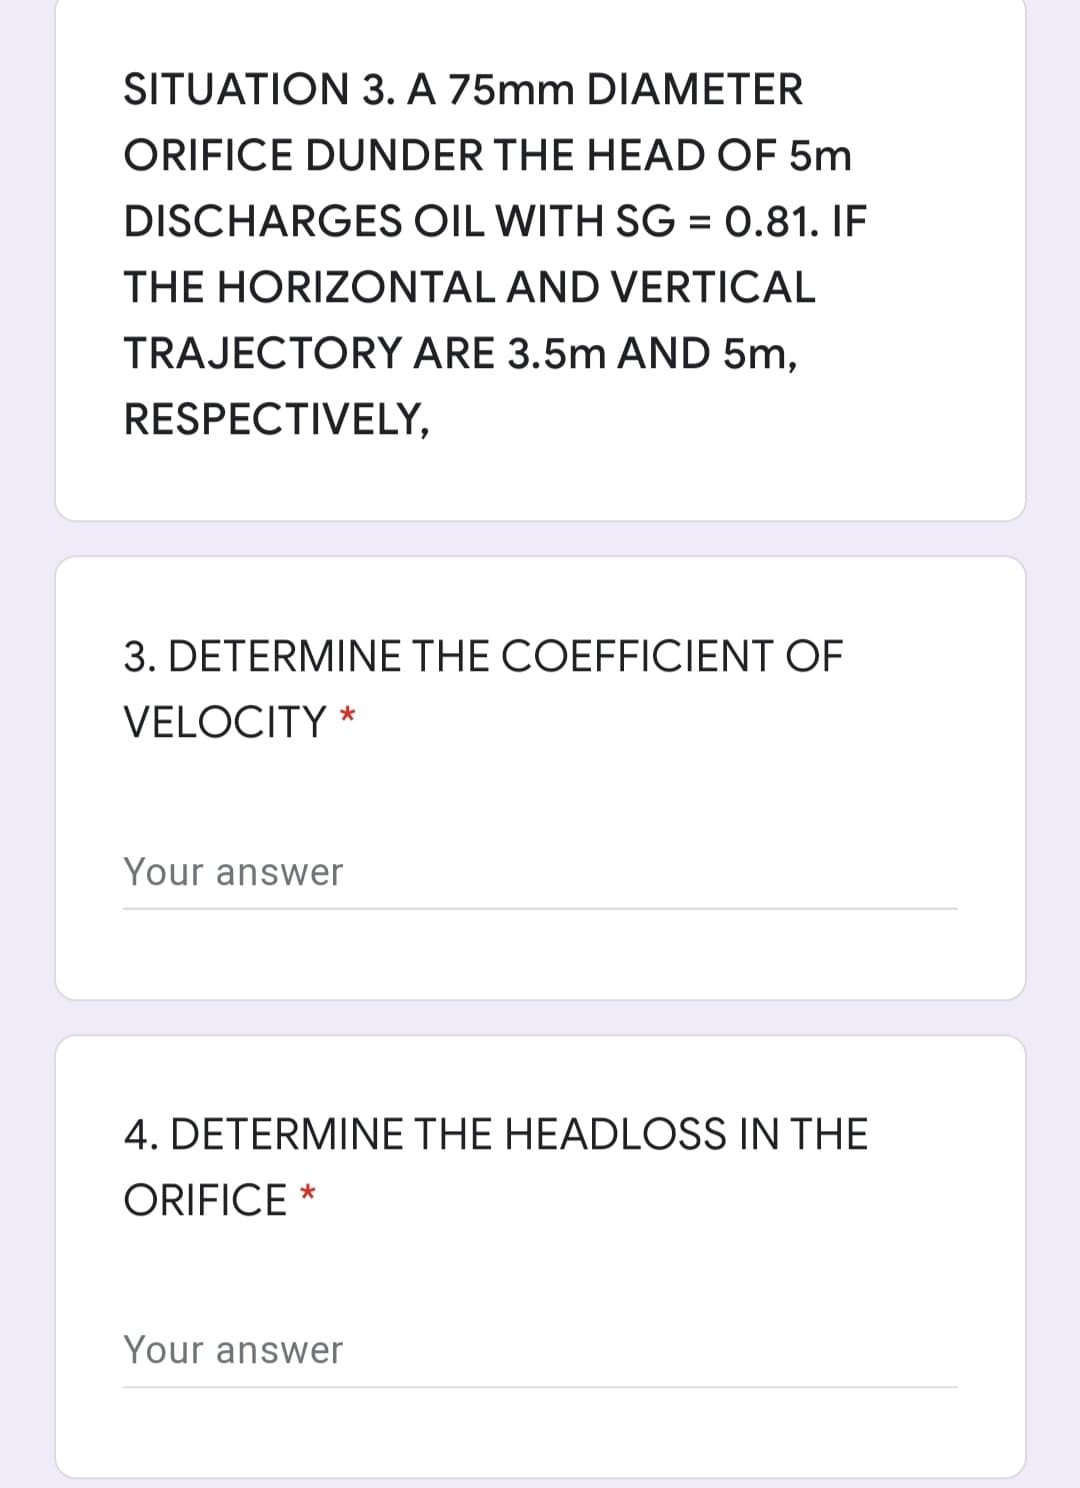 SITUATION 3. A 75mm DIAMETER
ORIFICE DUNDER THE HEAD OF 5m
DISCHARGES OIL WITH SG = 0.81. IF
THE HORIZONTAL AND VERTICAL
TRAJECTORY ARE 3.5m AND 5m,
RESPECTIVELY,
3. DETERMINE THE COEFFICIENT OF
VELOCITY
Your answer
4. DETERMINE THE HEADLOSS IN THE
ORIFICE *
Your answer
